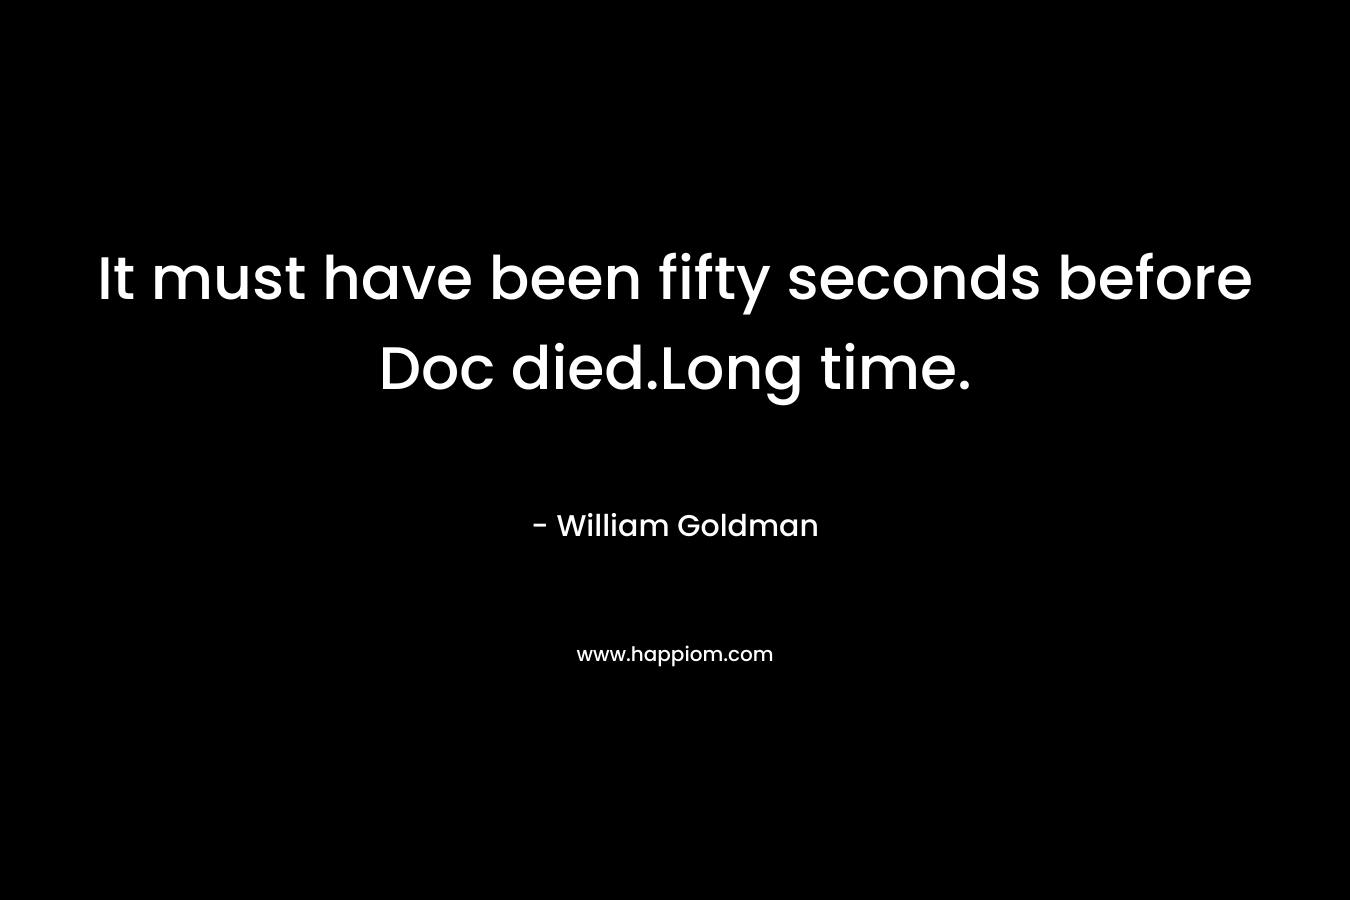 It must have been fifty seconds before Doc died.Long time. – William Goldman